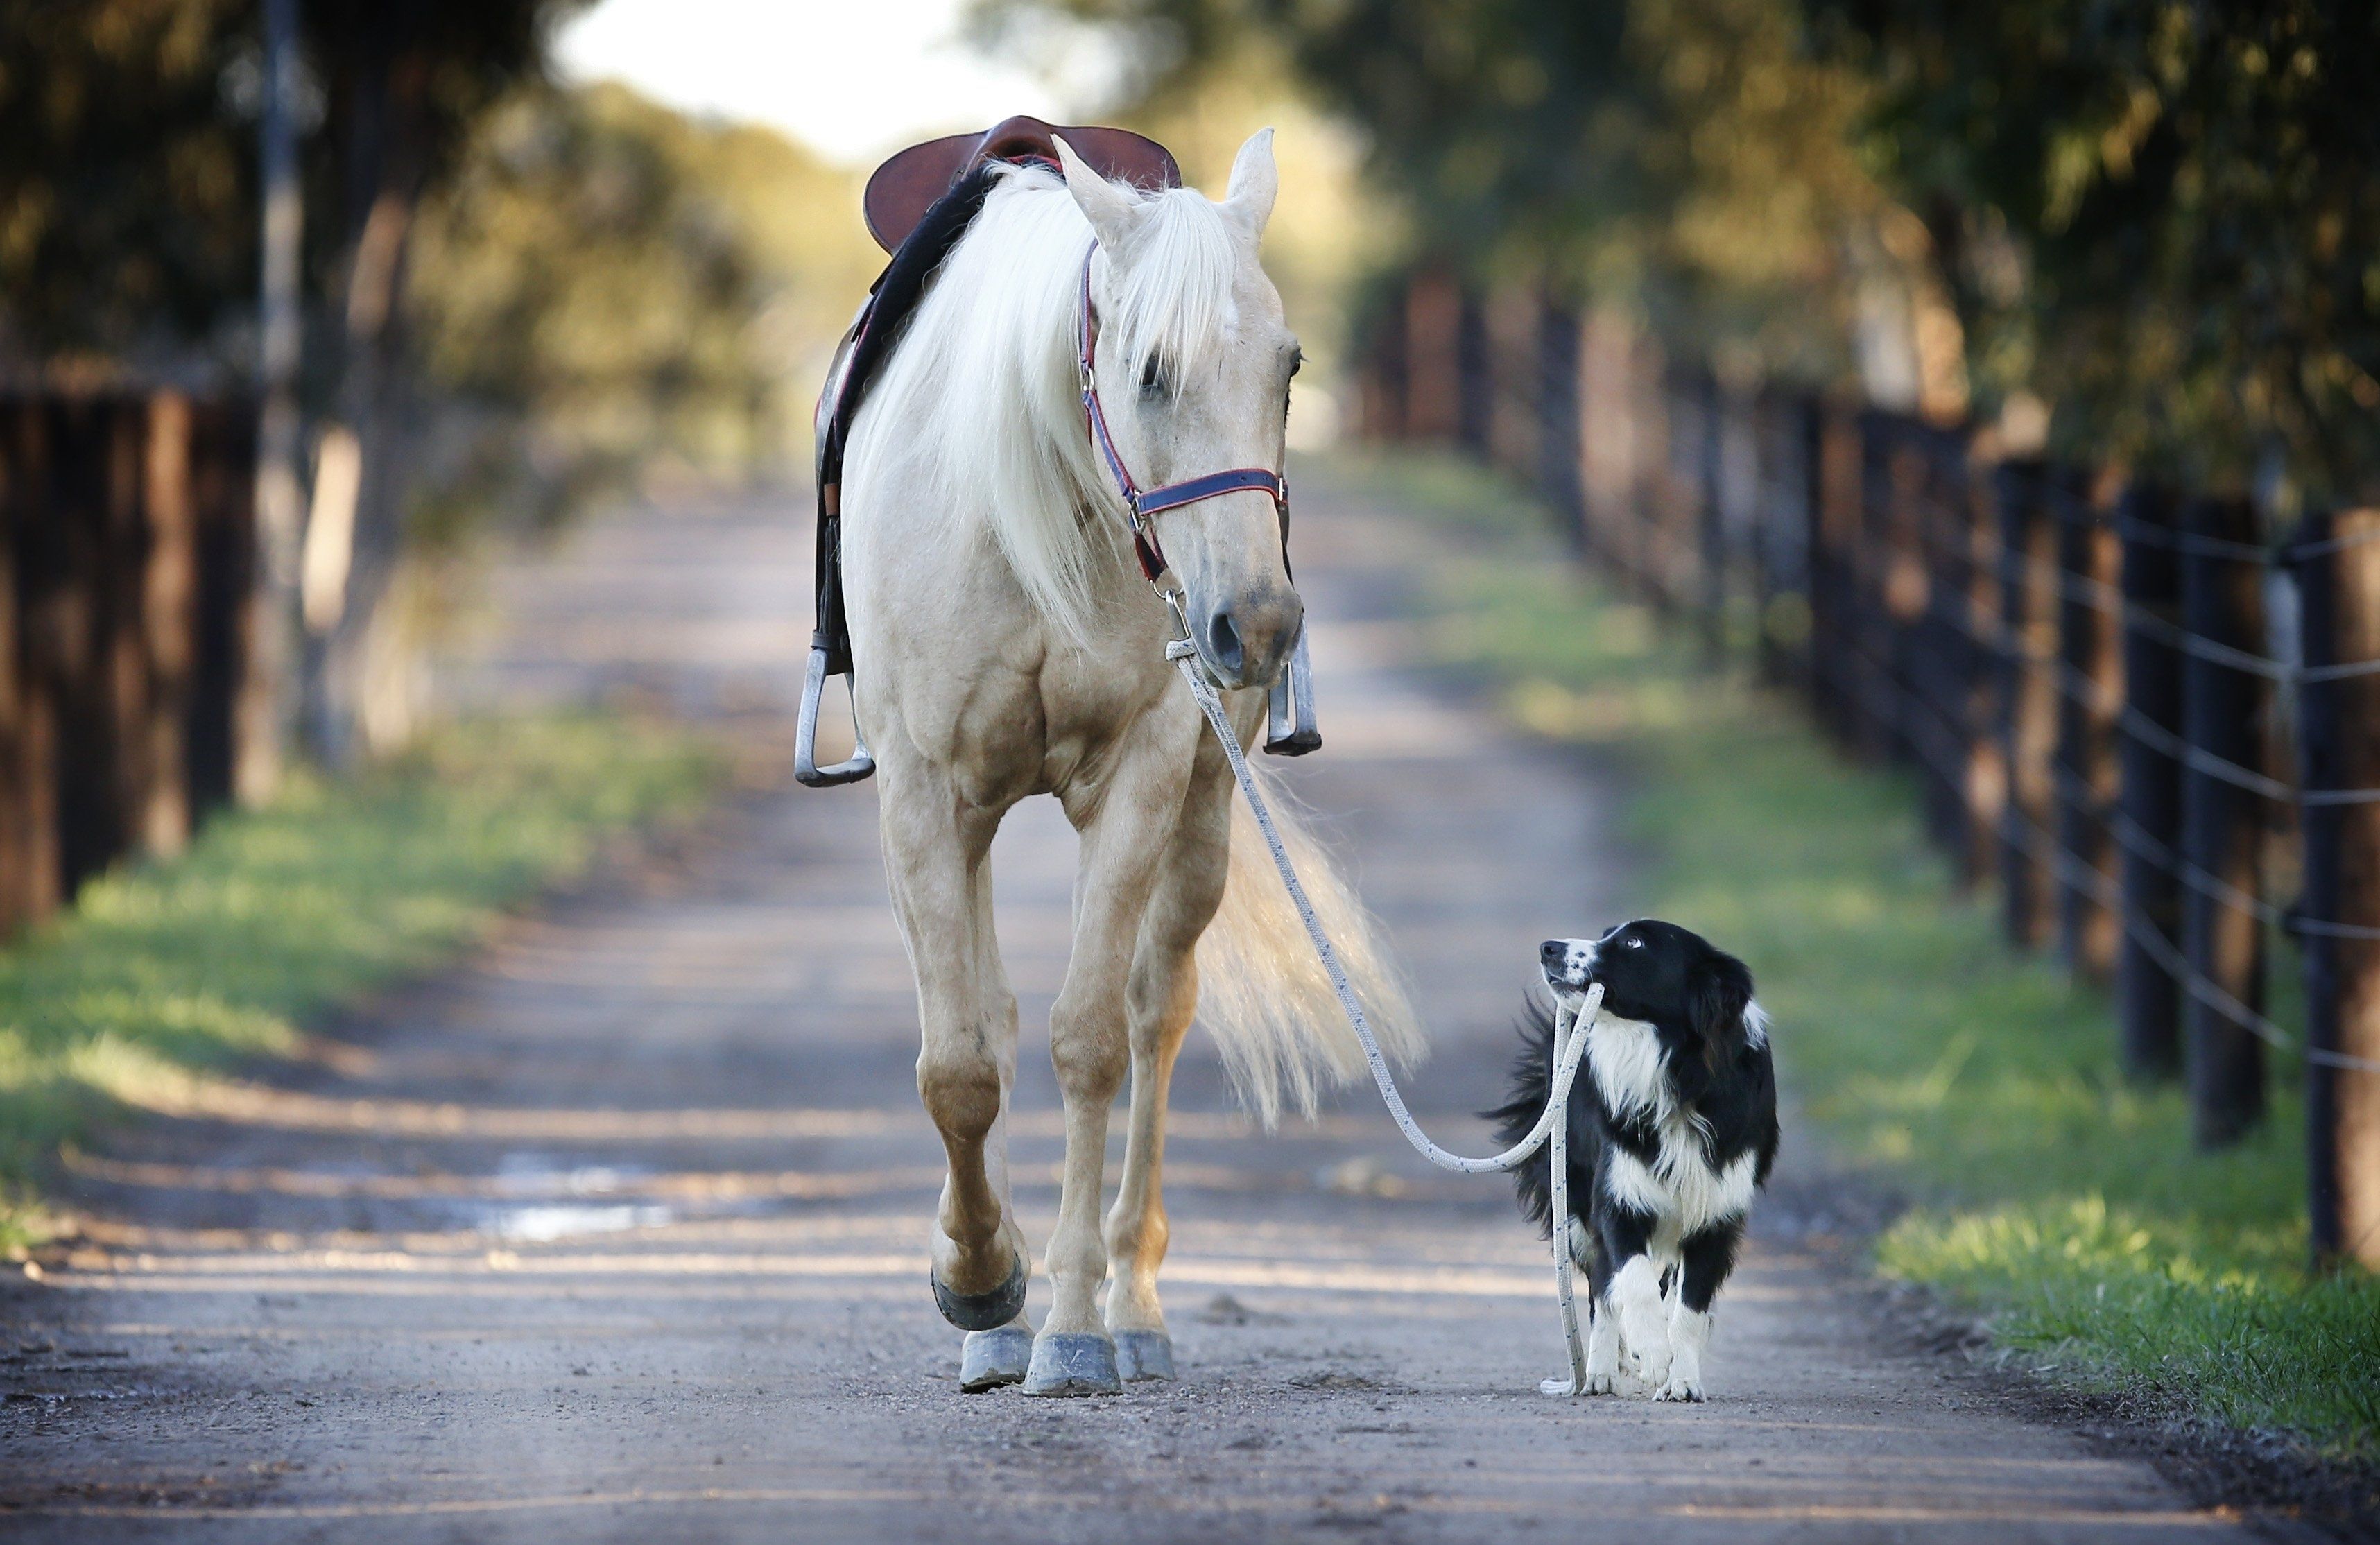 A blind horse lead by a faithful friend HD Wallpaper. Background